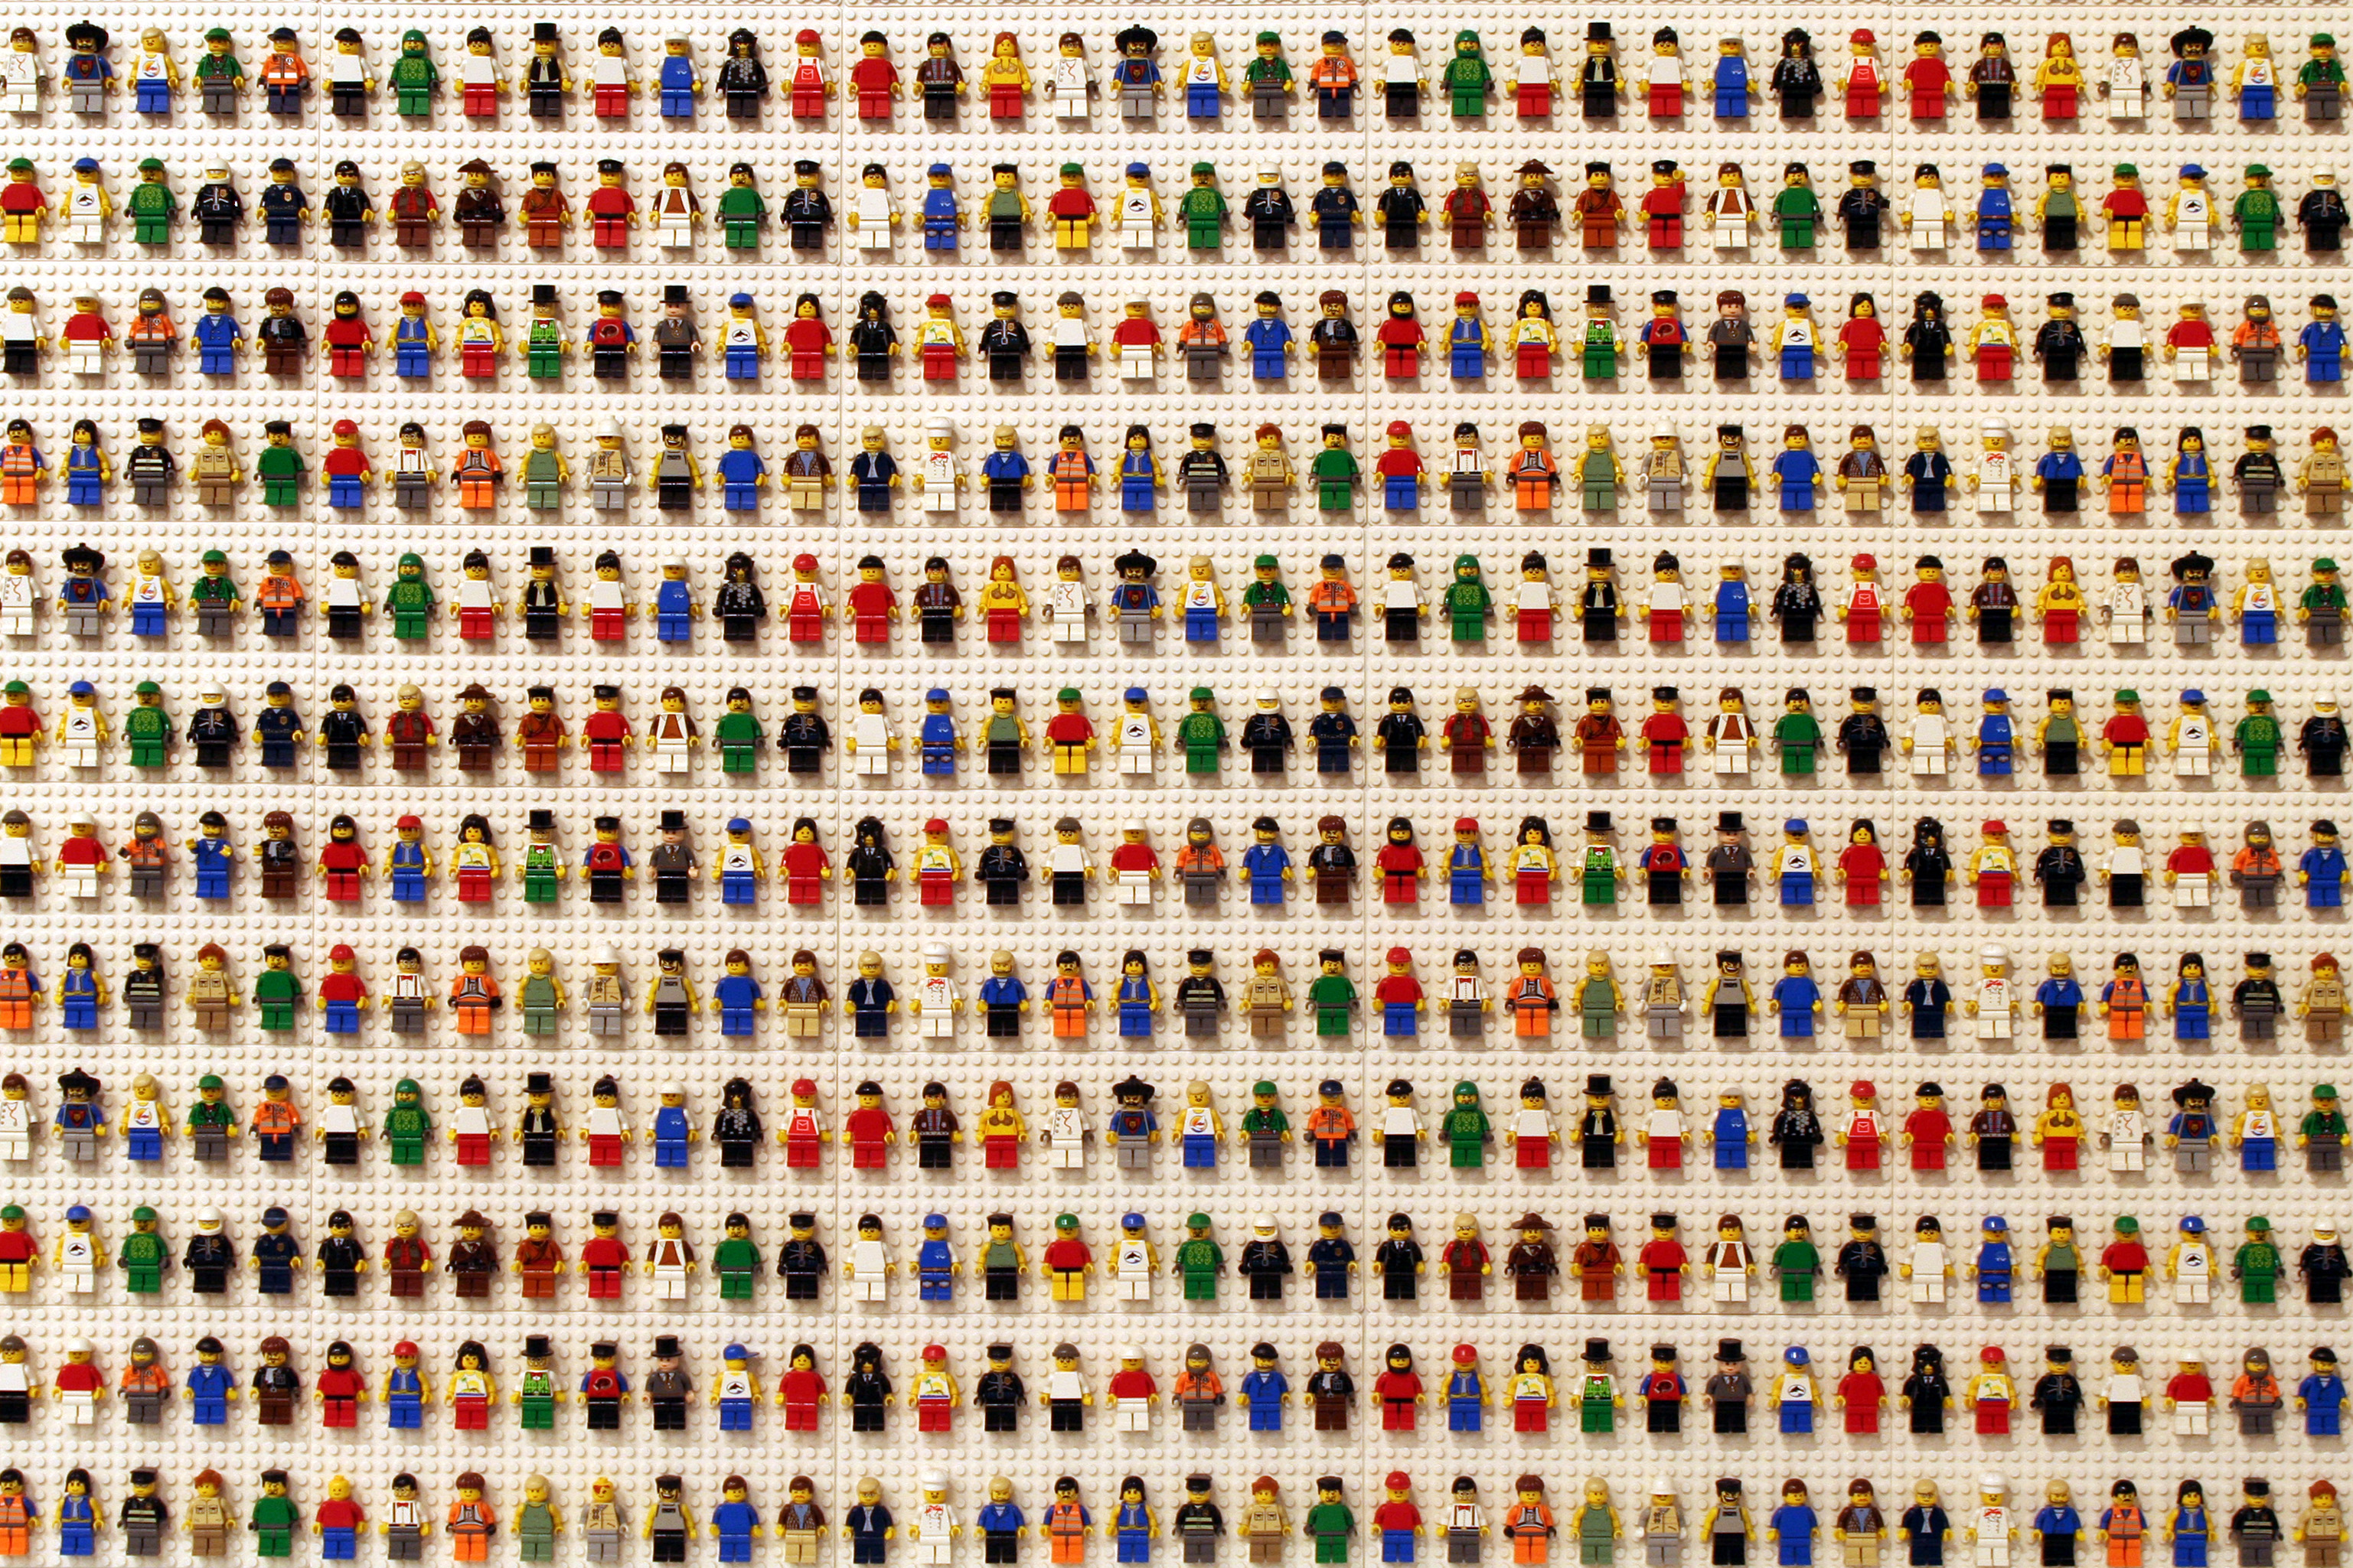  Wallpaper Abyss Explore the Collection Lego Products Lego 293277 3074x2049